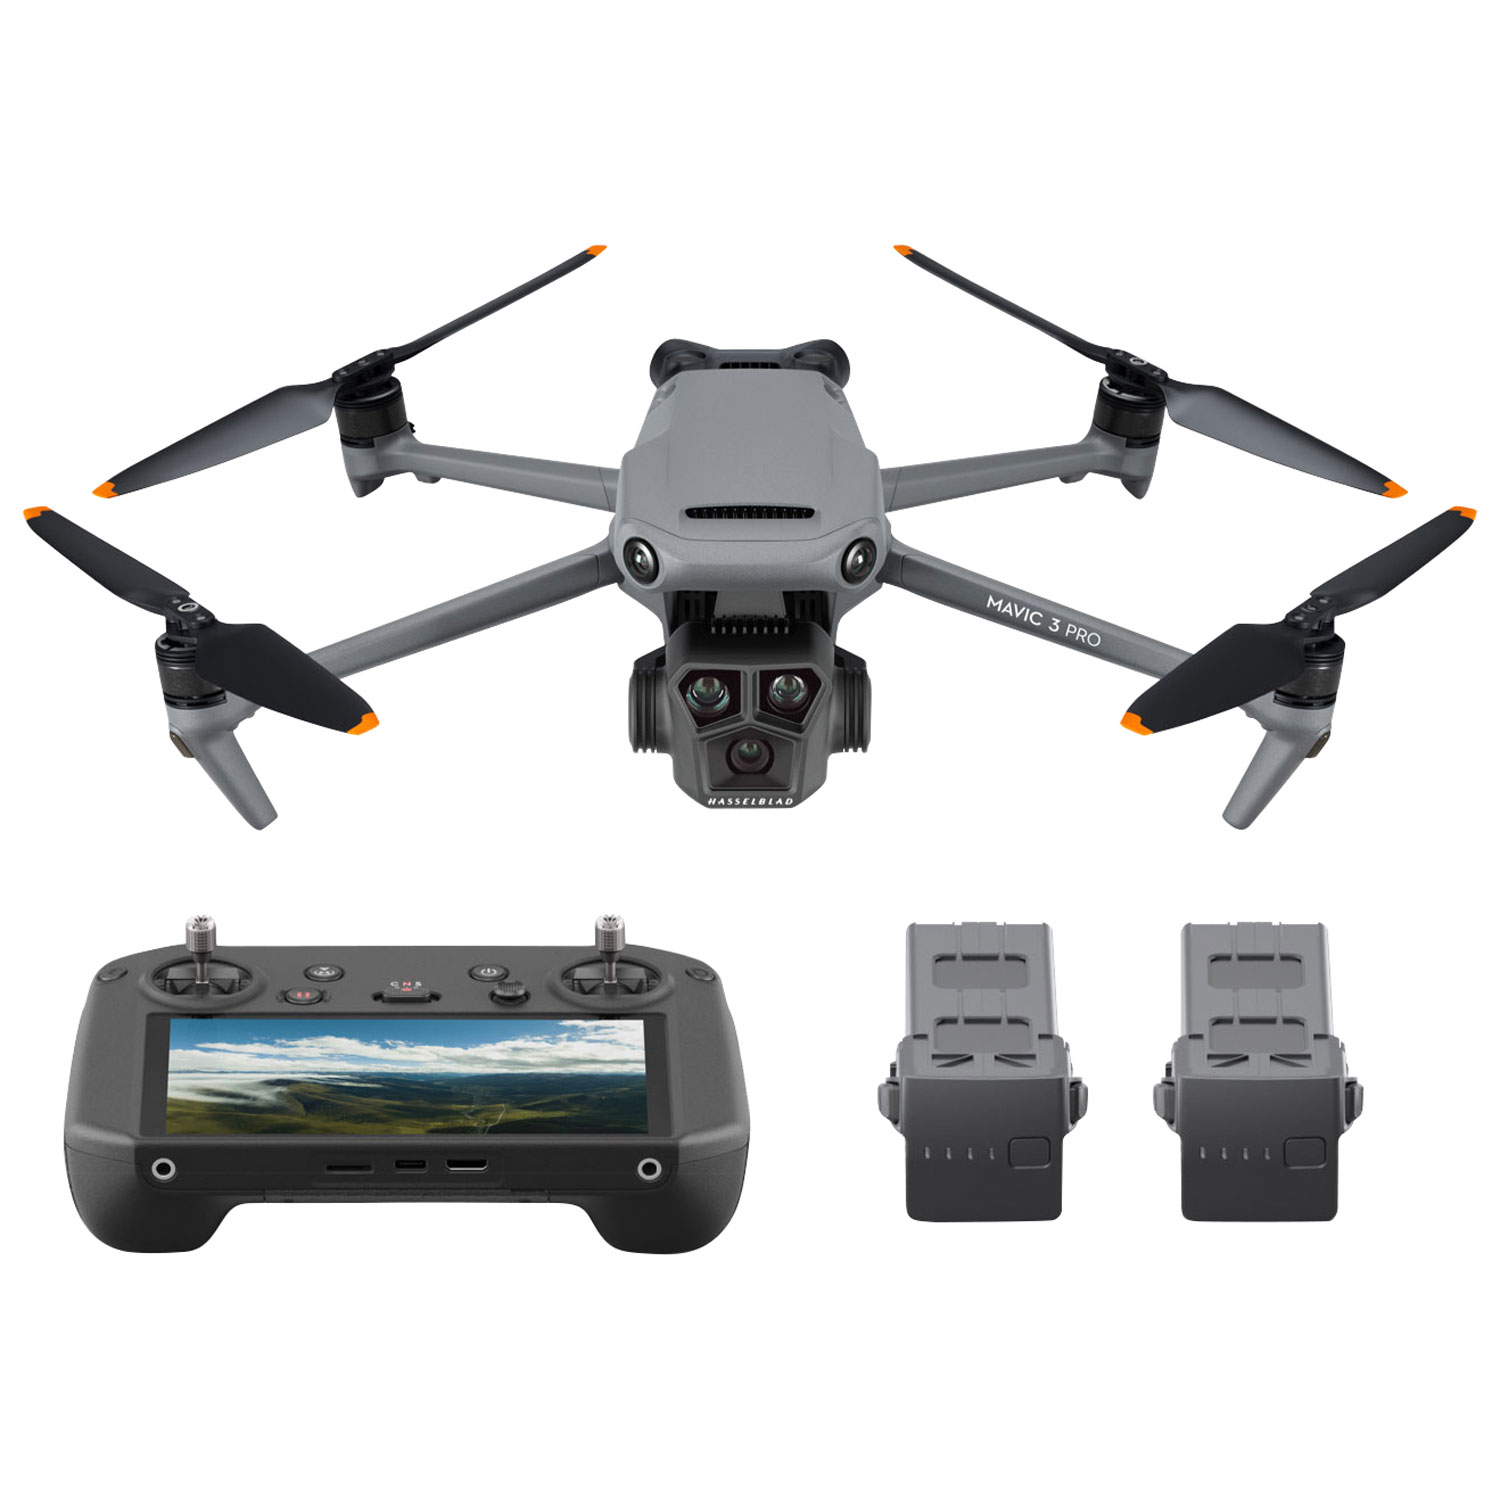 DJI Mavic 3 Pro Fly More Combo Drone and Remote Control with Built-in Screen (DJI RC Pro) - Gray